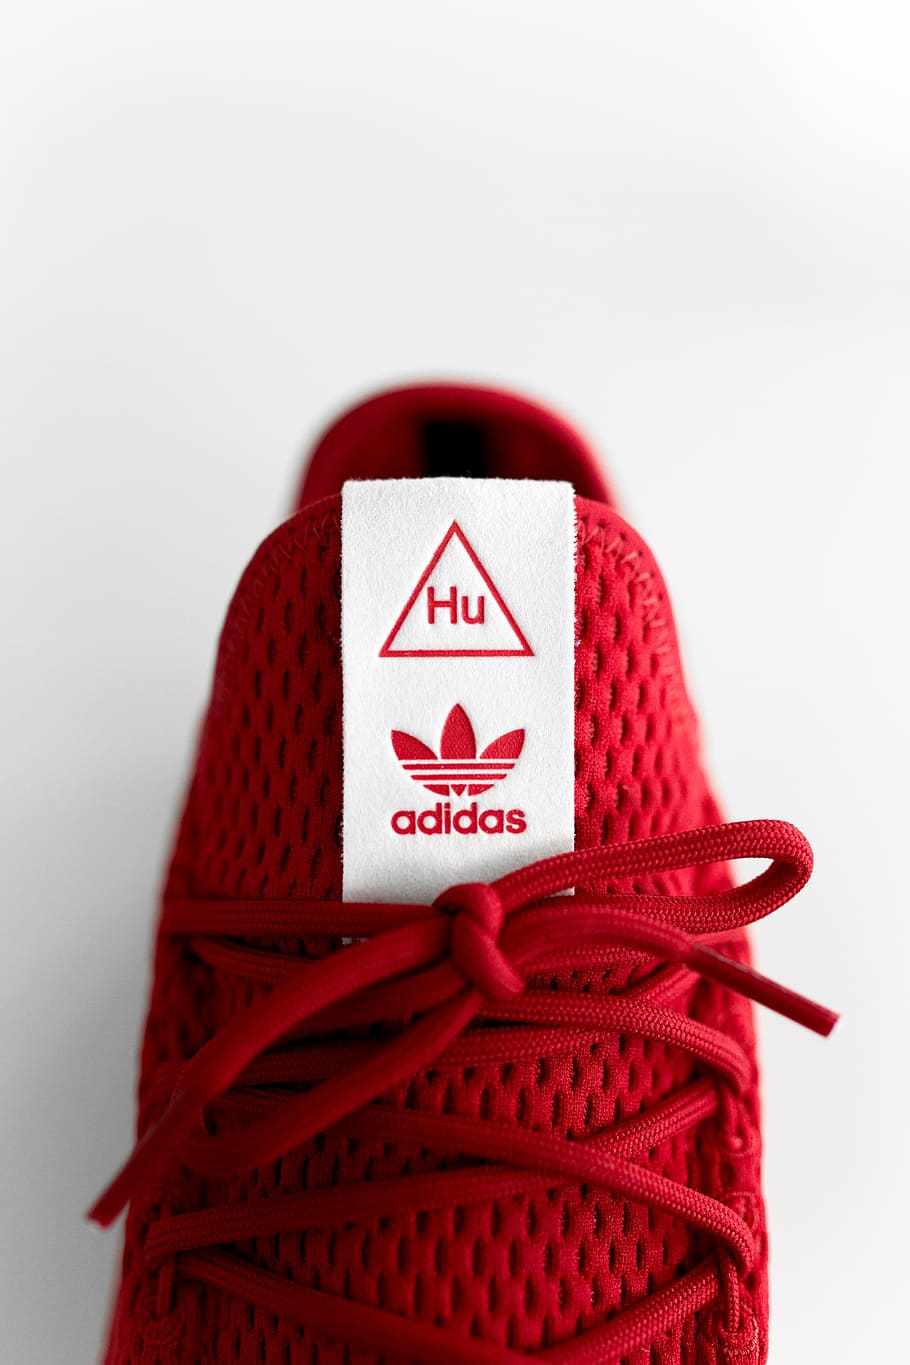 unpaired red adidas sneaker, closeup photo of unpaired red adidas Tennis HU sneaker against white background, HD wallpaper